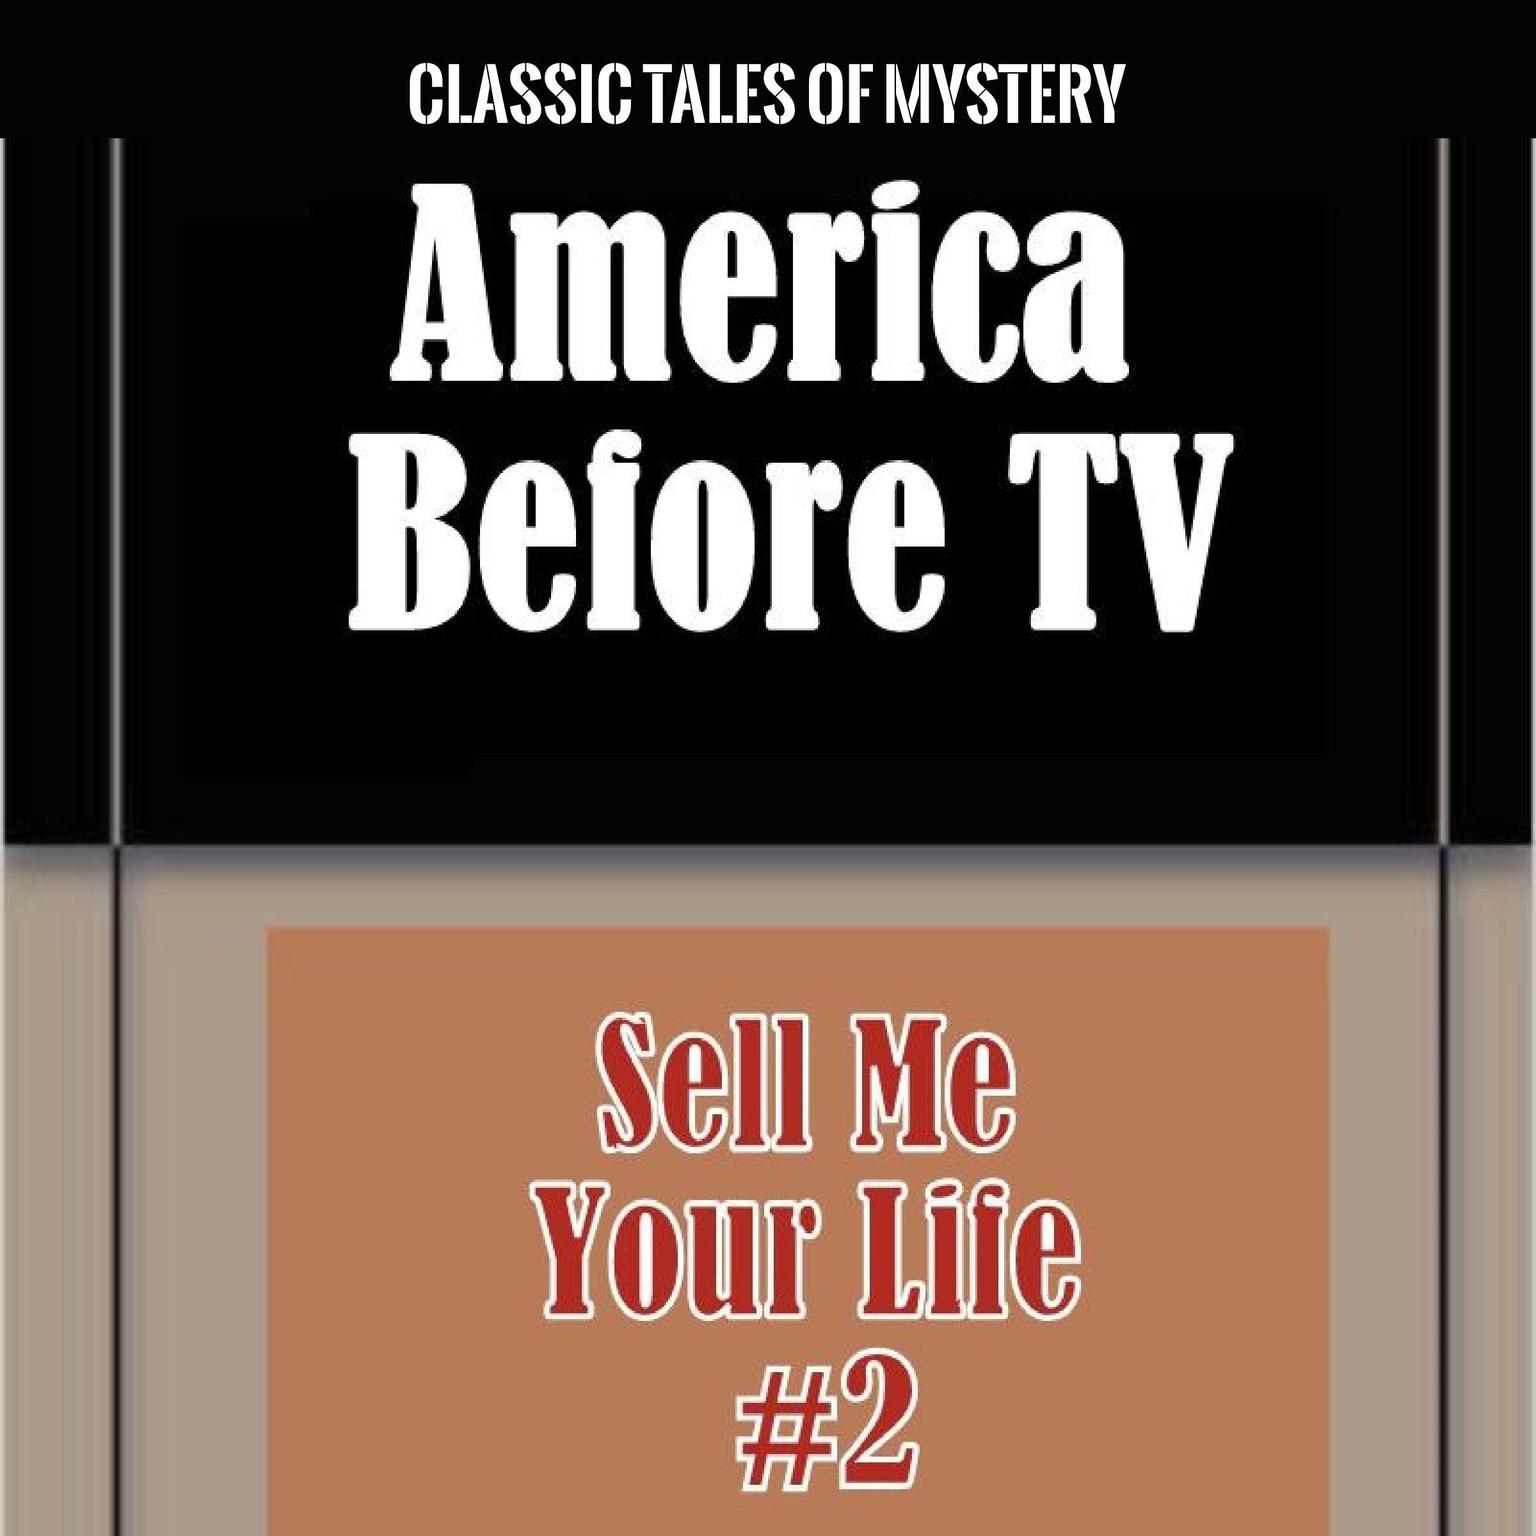 America Before TV - Sell Me Your Life  #2 (Abridged) Audiobook, by Classic Tales of Mystery